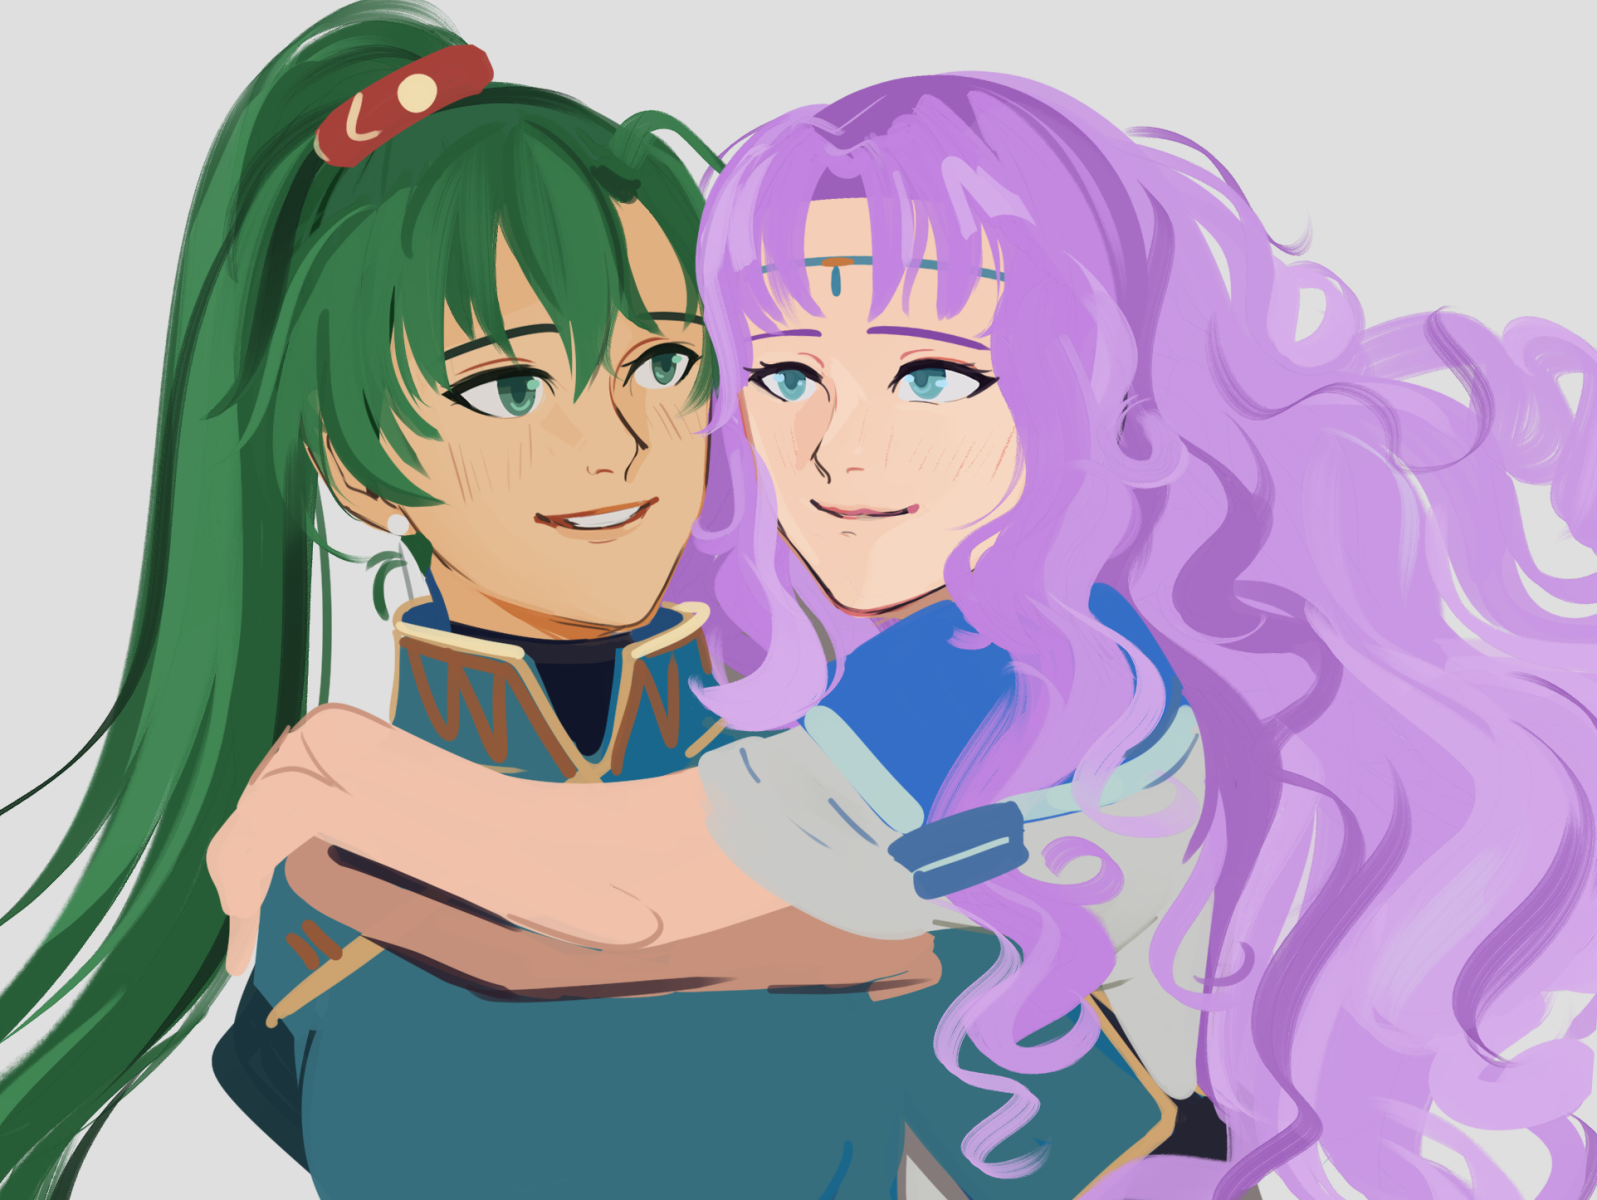 Lyn and Florina by Yancy on Dribbble